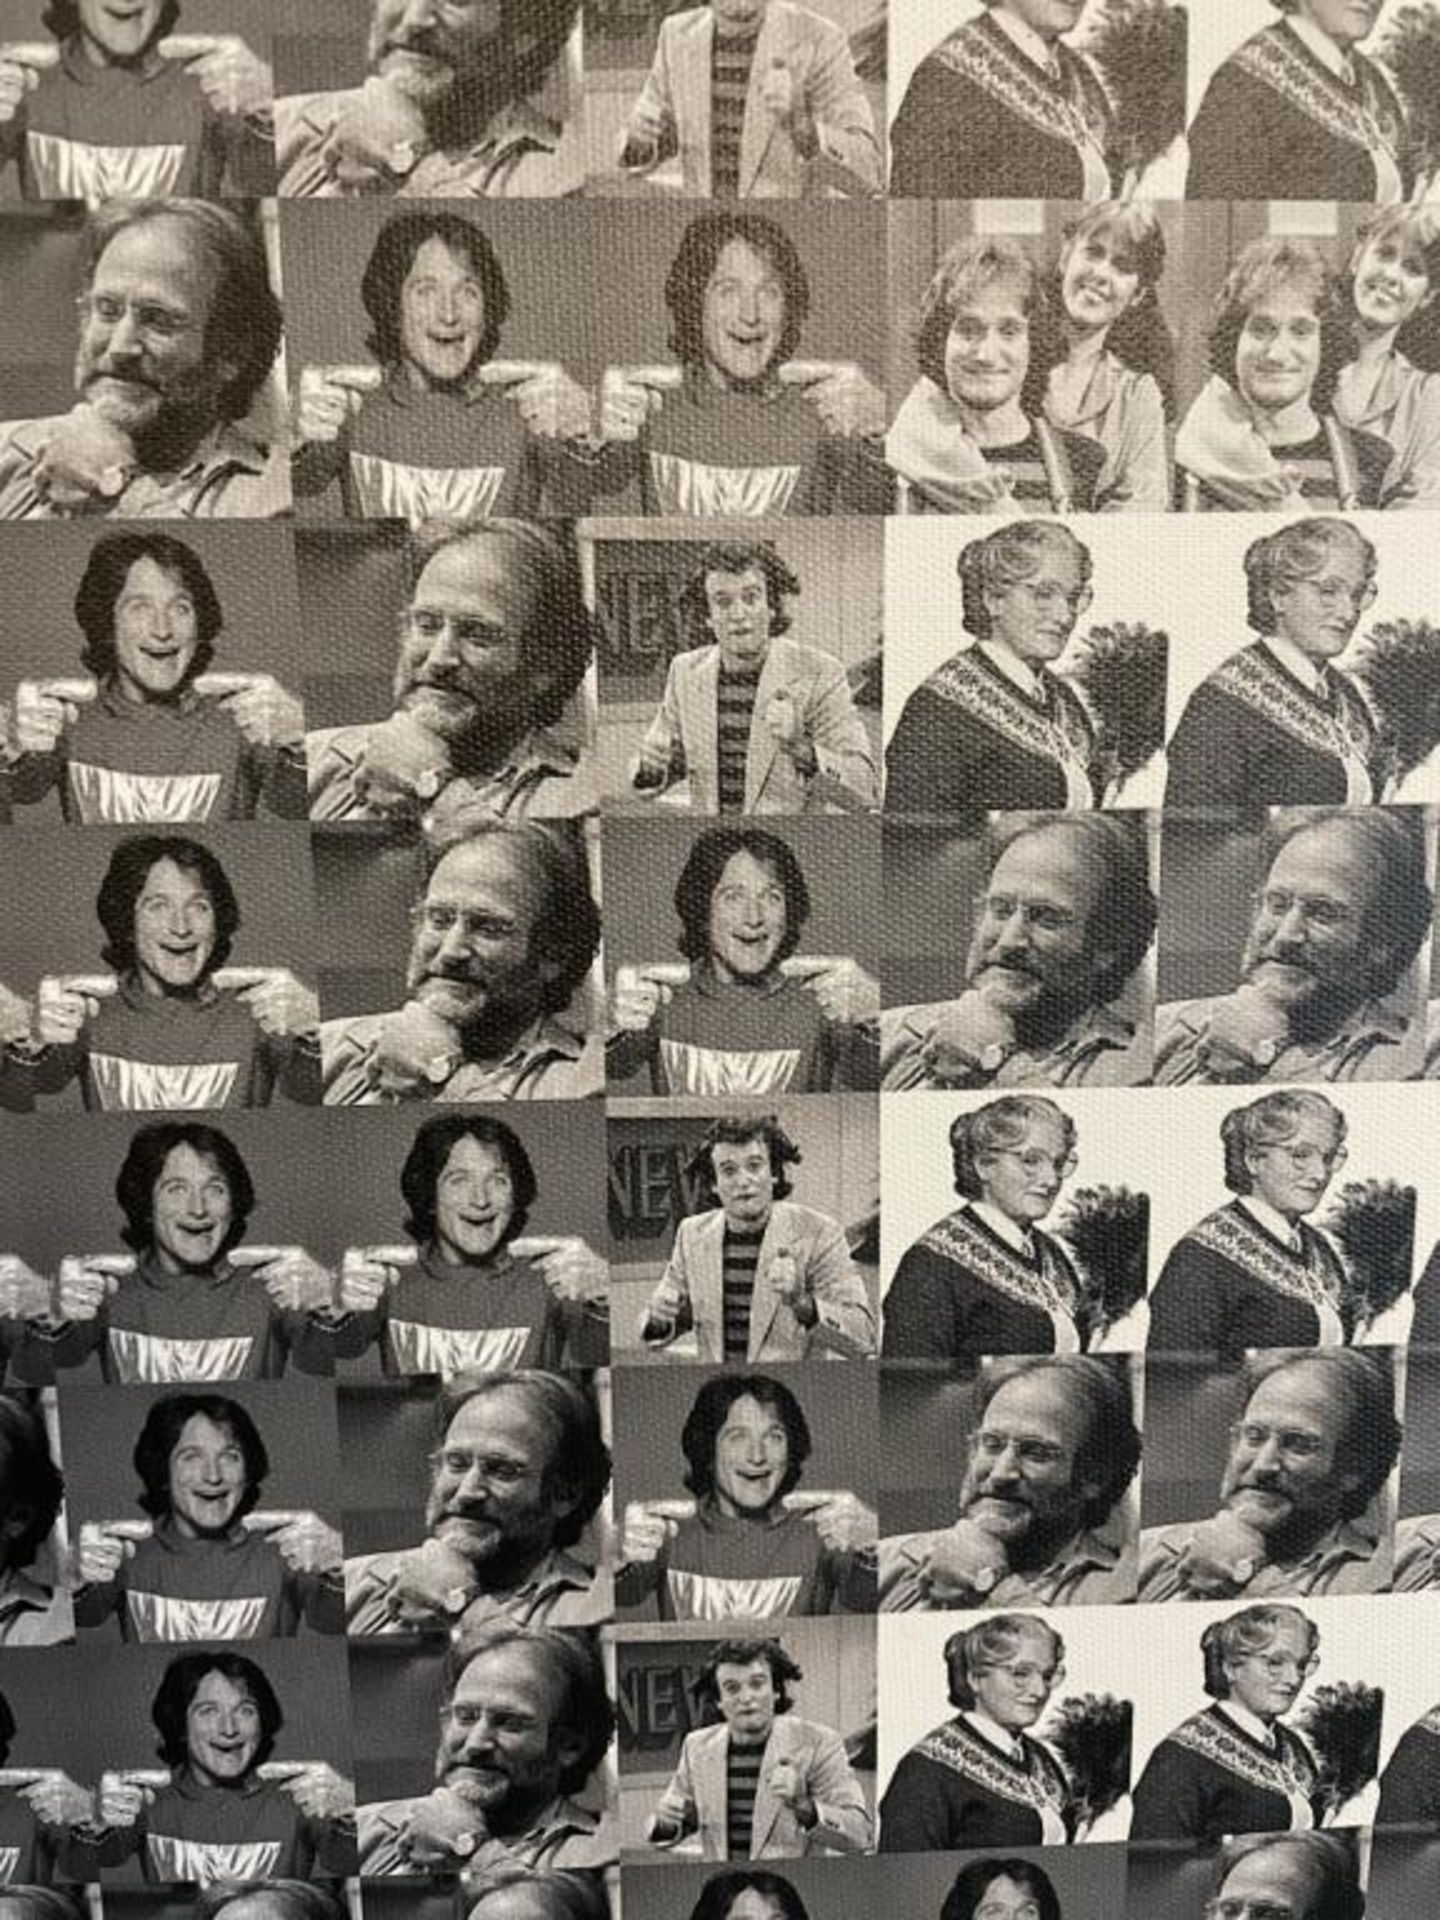 Robin Williams Twitter Tribute "Photo Mosaic of Celebrity Tribute Tweets" - Image 7 of 13